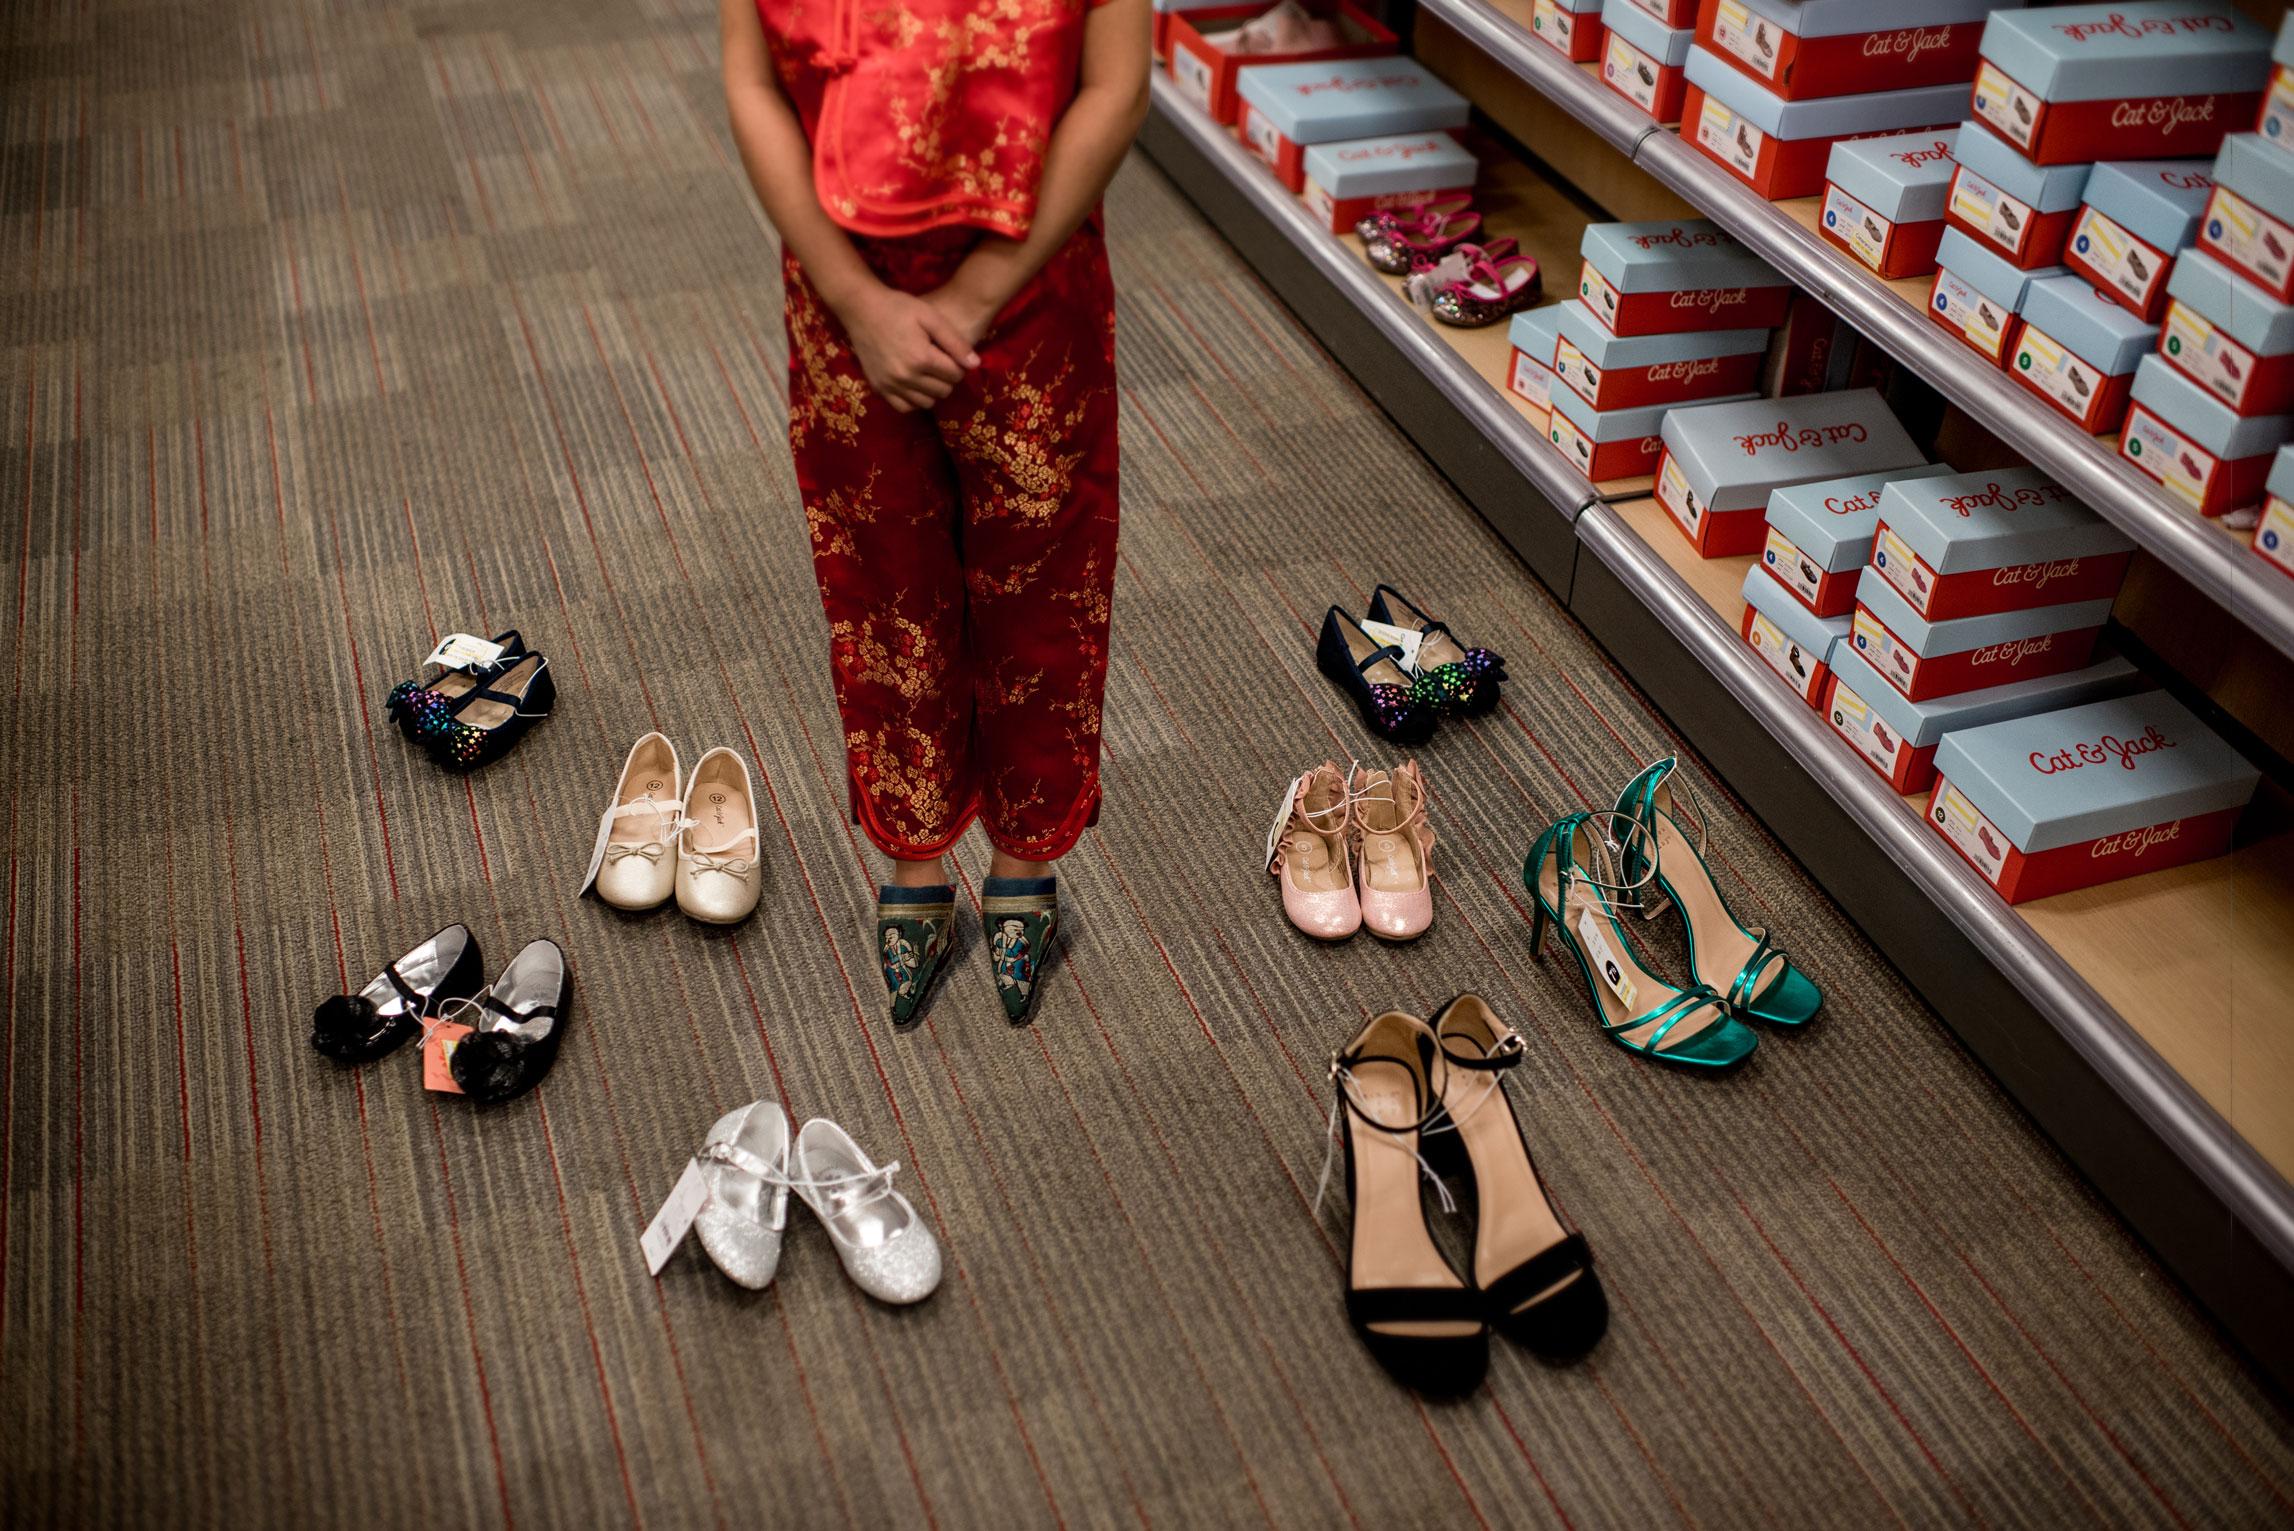 Tomgirl -  Shoes  As I walked through Target with my kids, I...